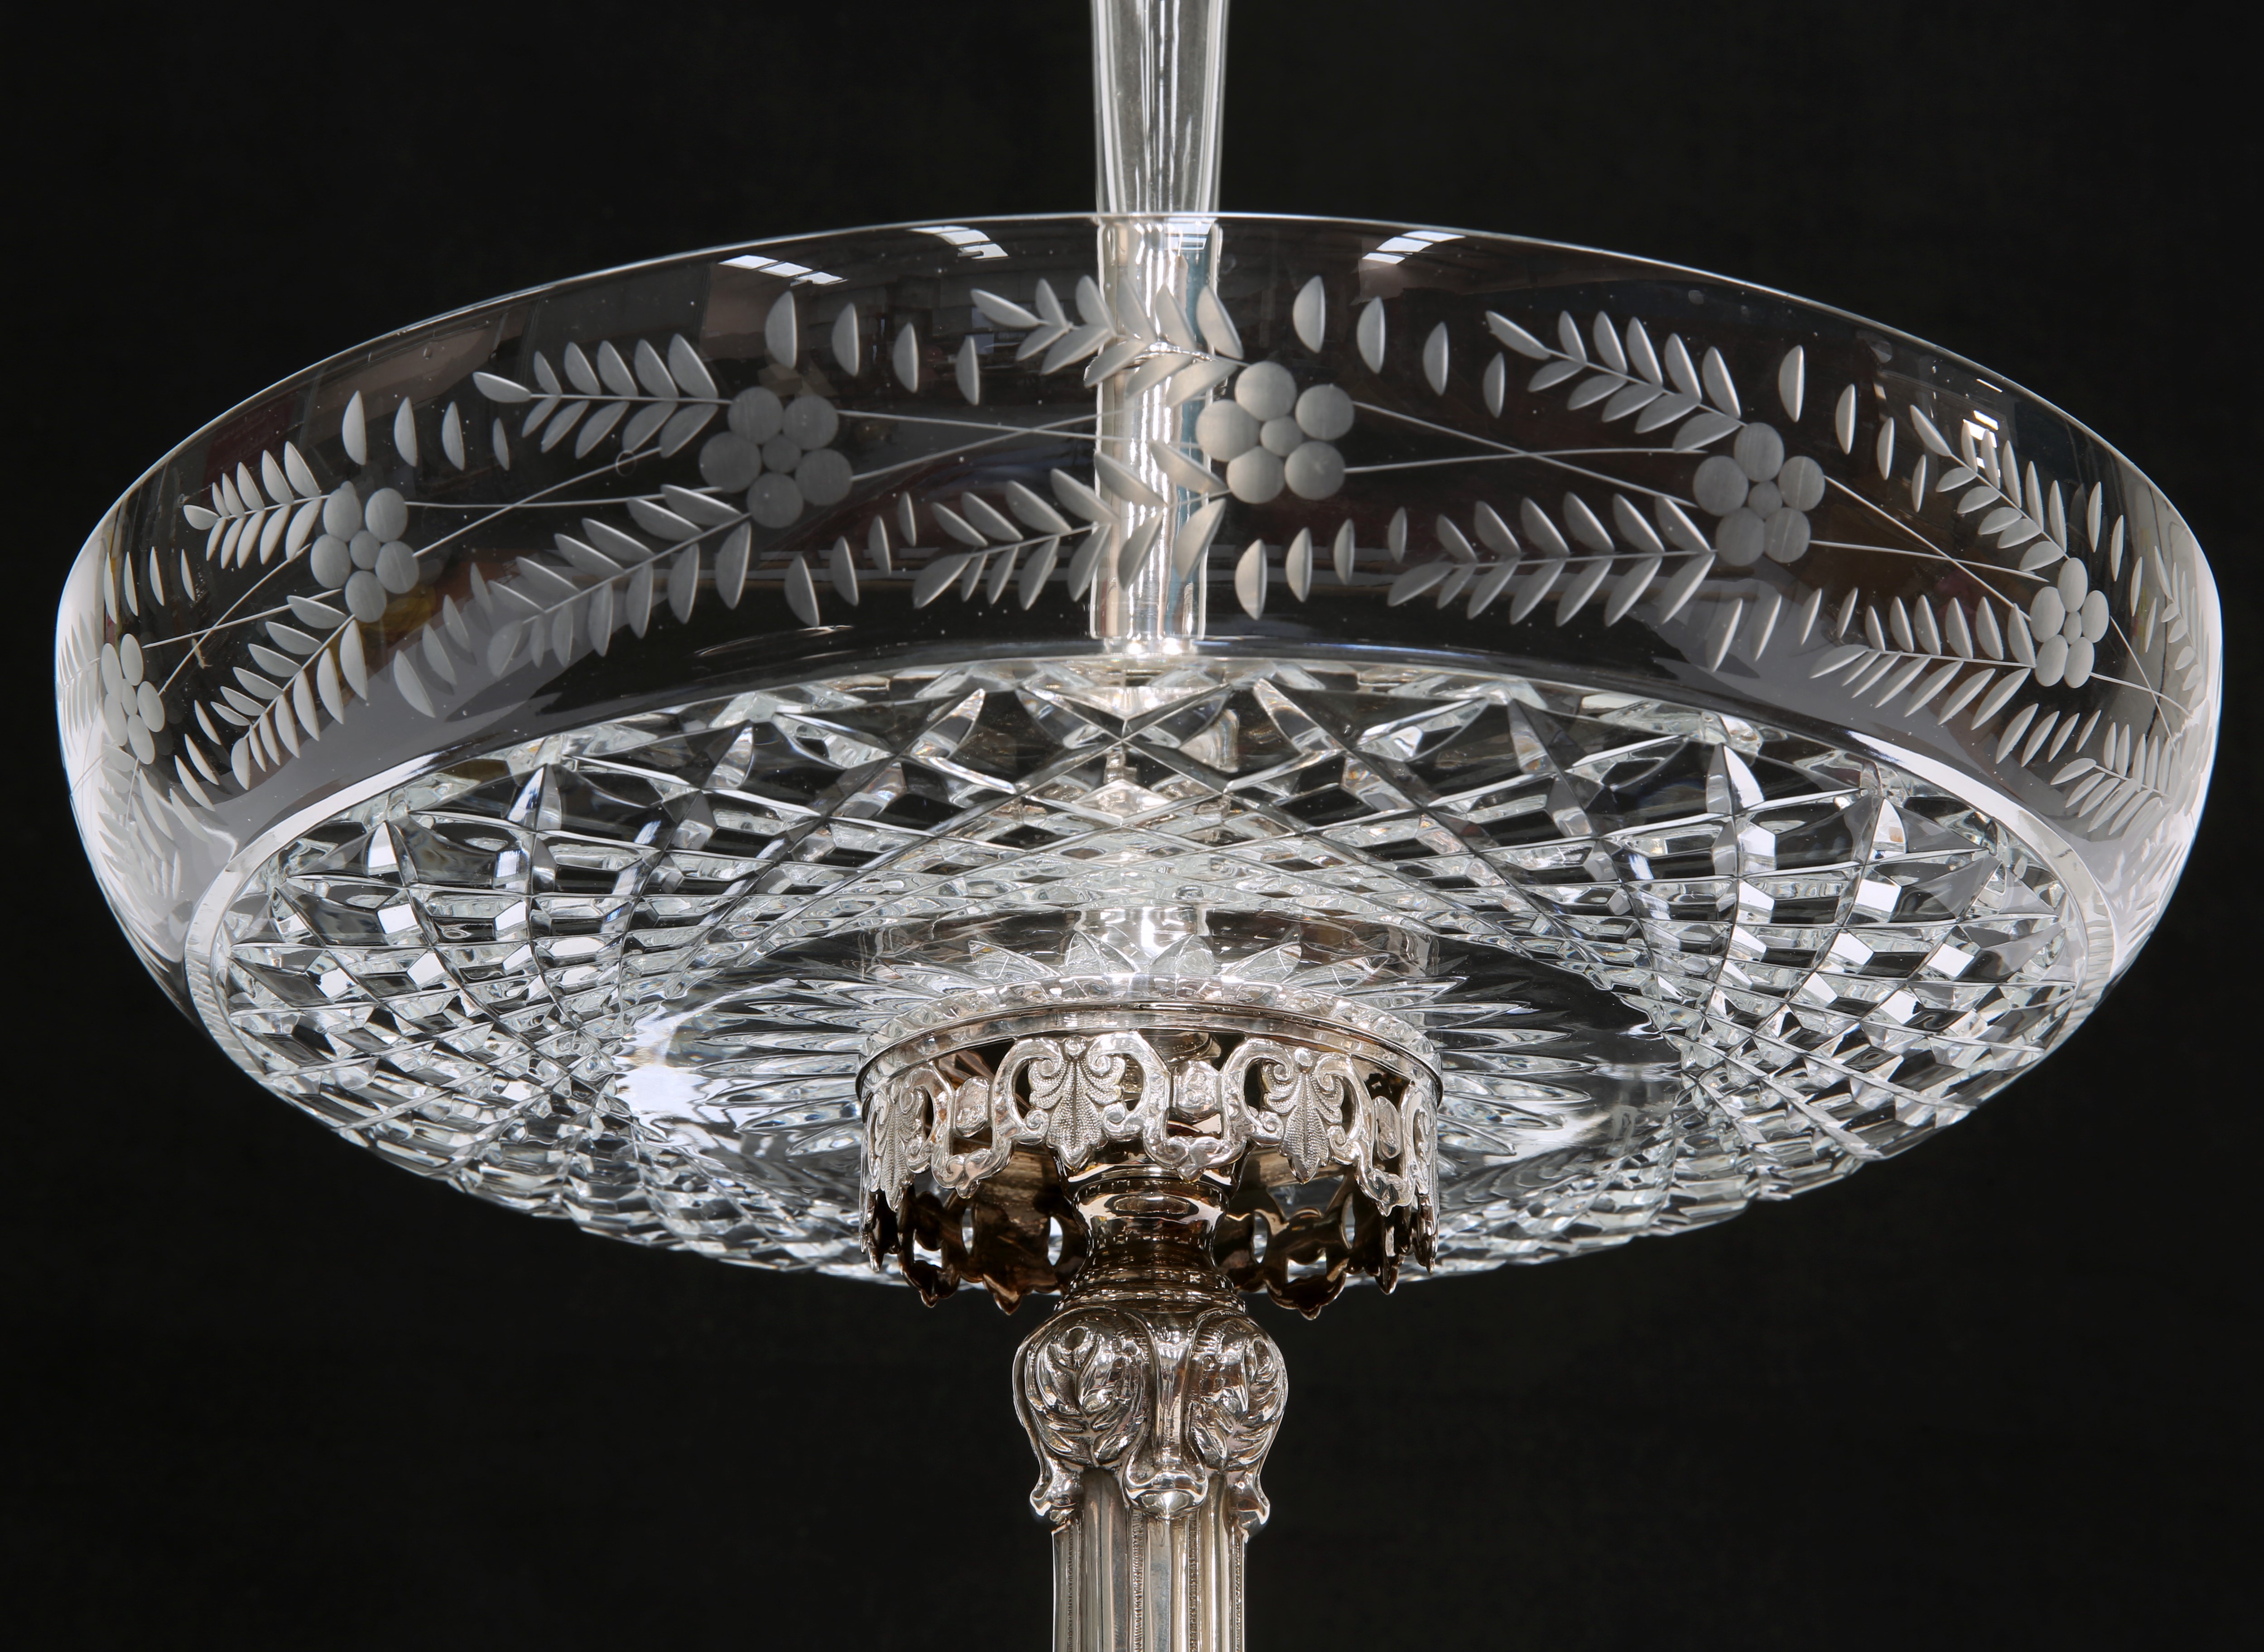 A HANDSOME PAIR OF 19TH CENTURY SILVER-PLATED CENTREPIECES ON MIRRORED STANDS - Image 15 of 16